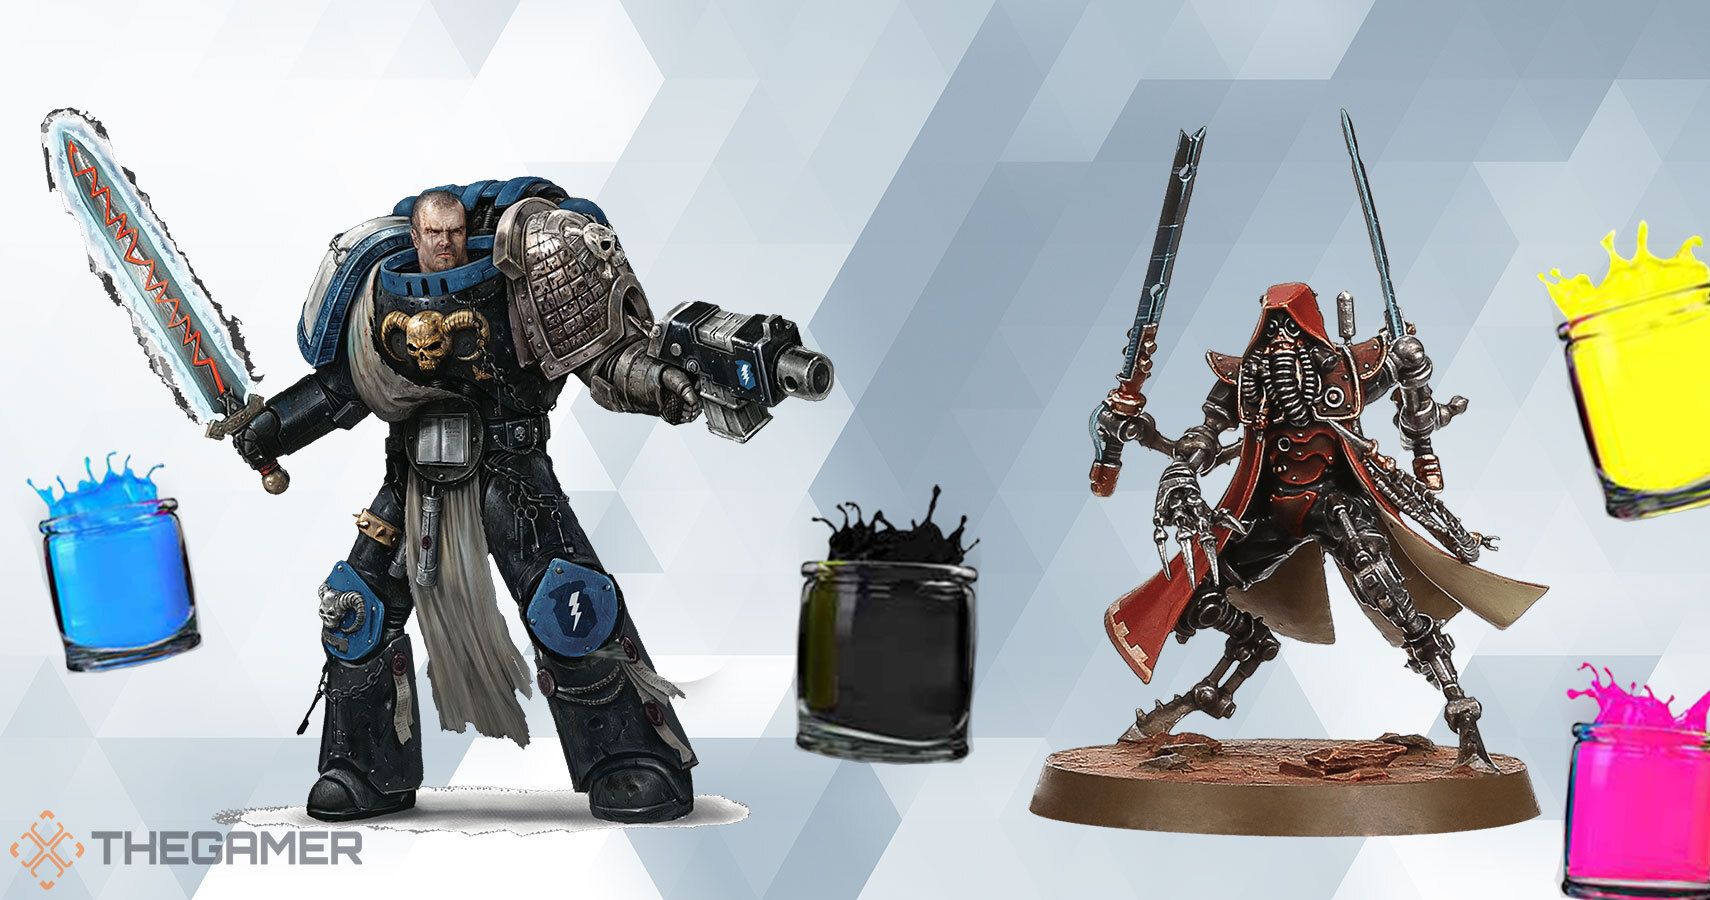 We are painting warhammer, 40k and d&d minis!